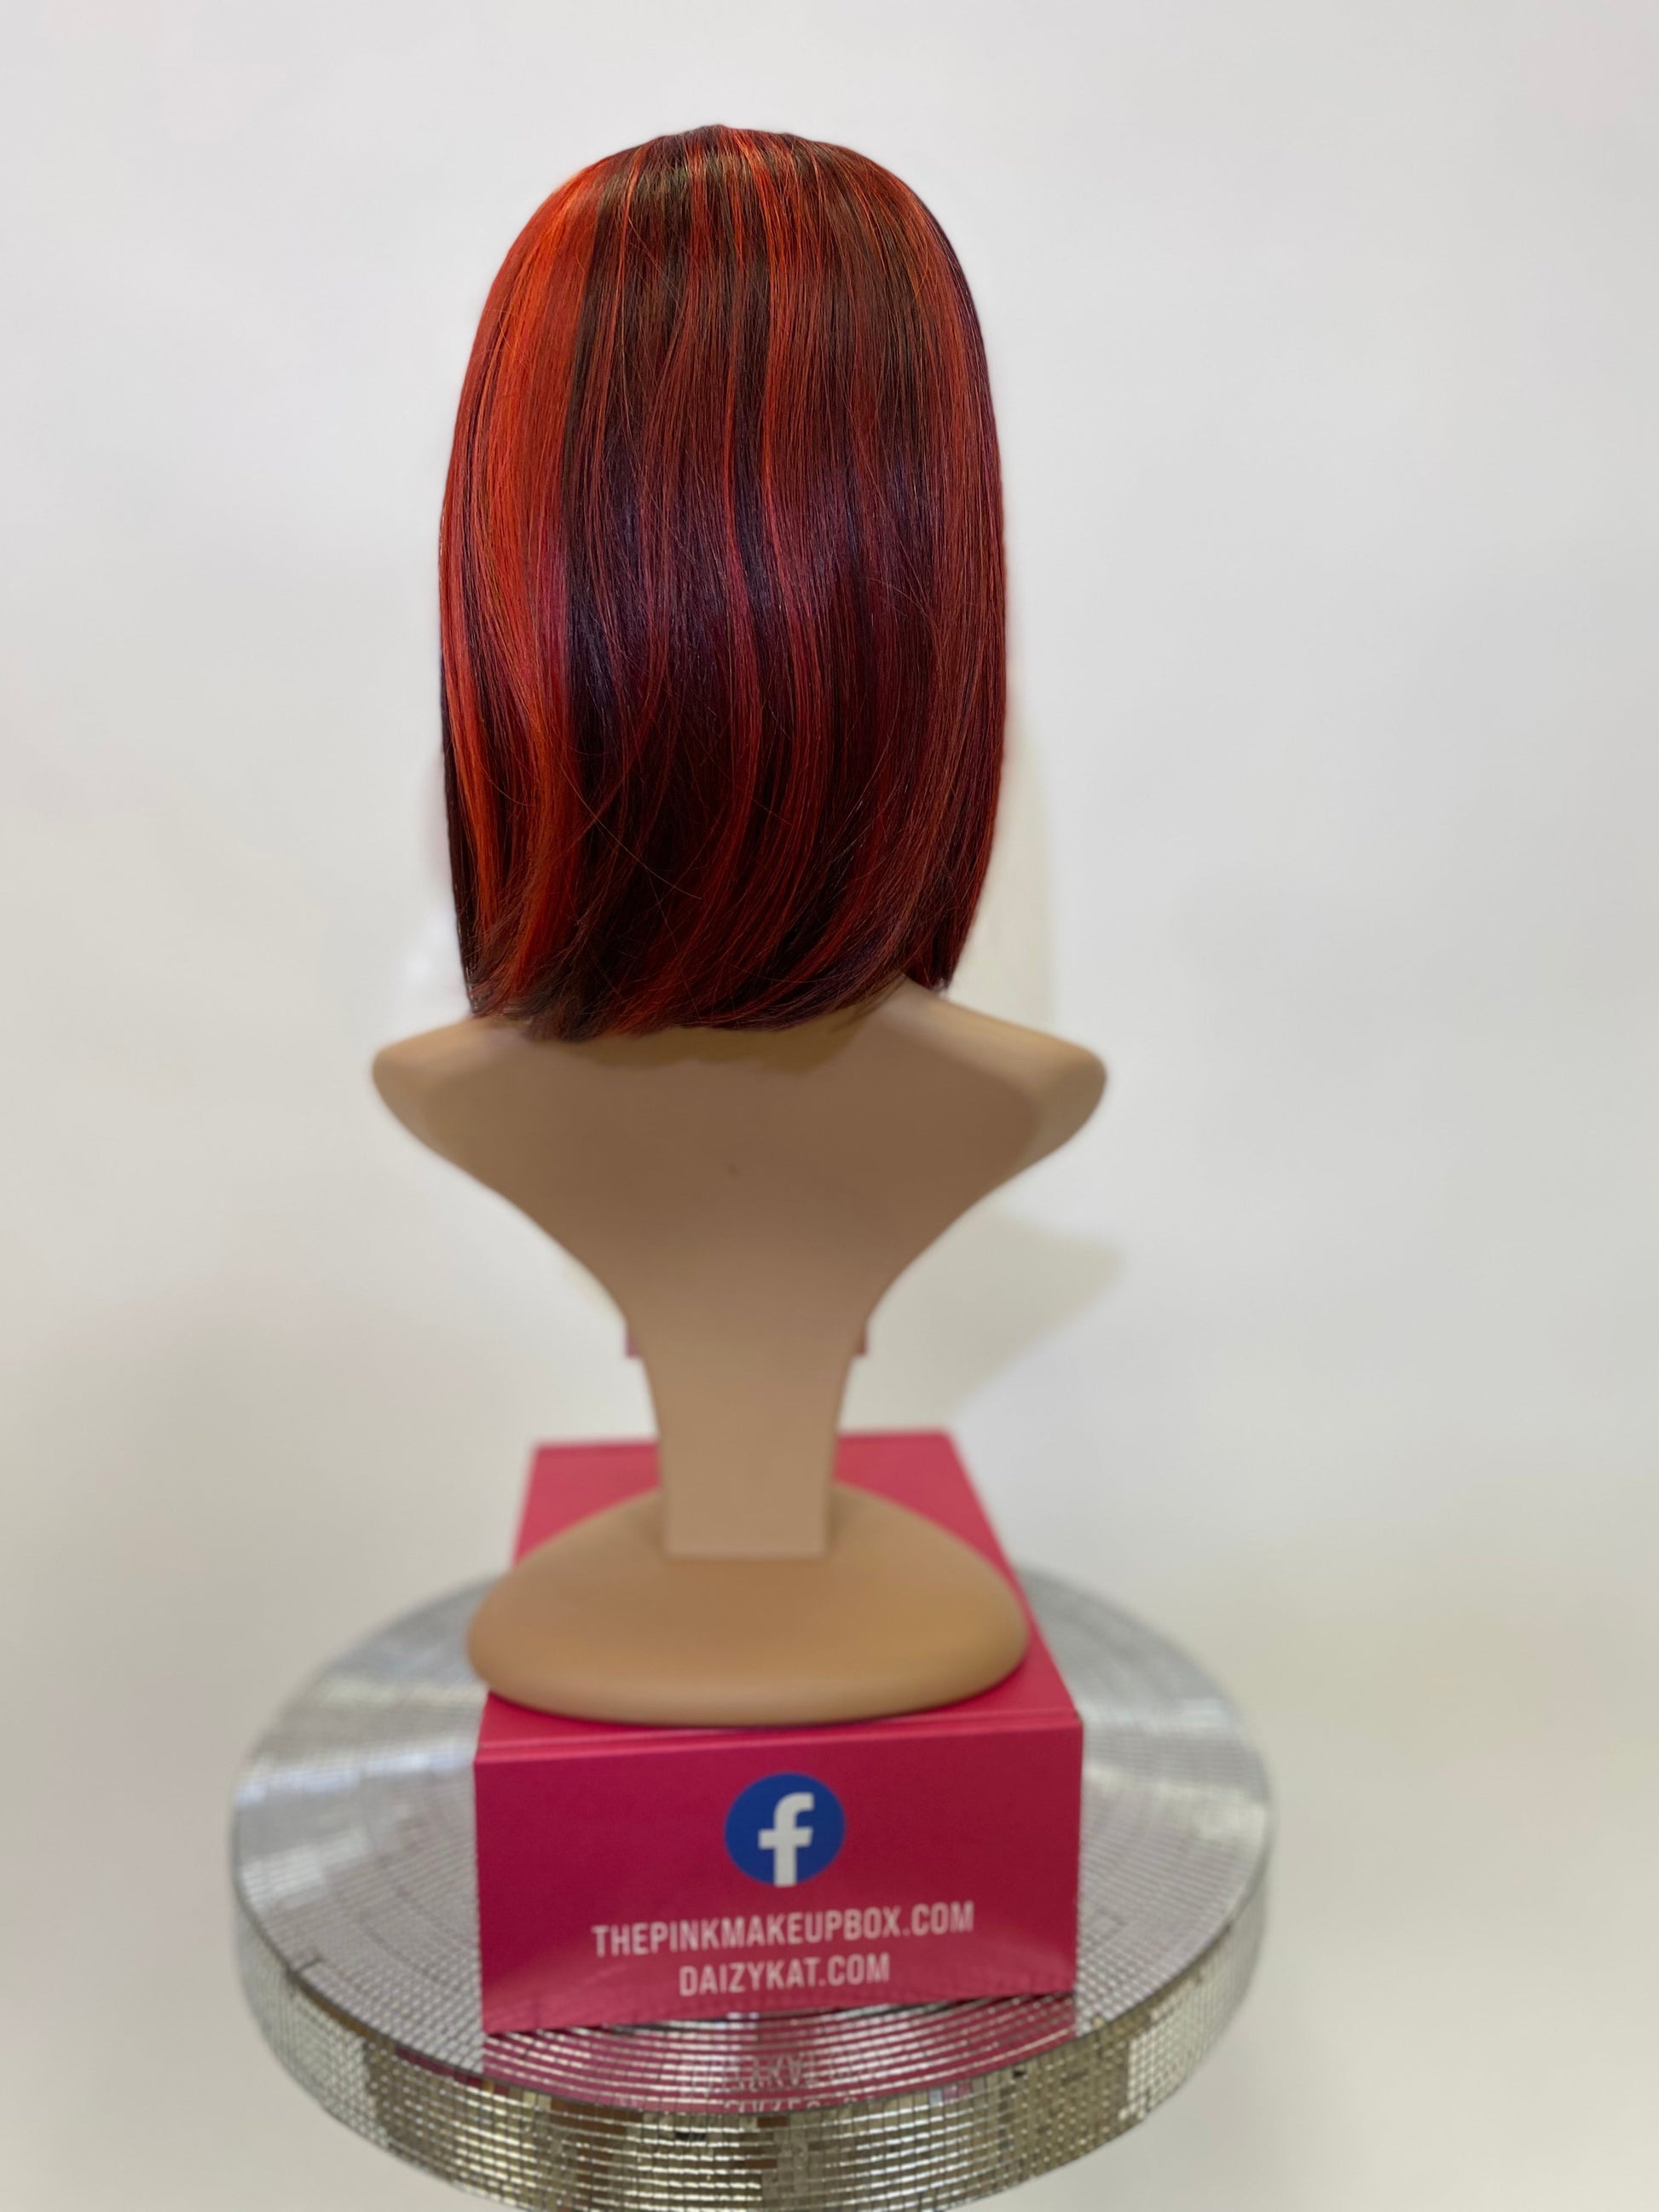 27 Tracy - 13x7 Free Part Lace Front Wig - RED - DaizyKat Cosmetics 27 Tracy - 13x7 Free Part Lace Front Wig - RED DaizyKat Cosmetics Wigs